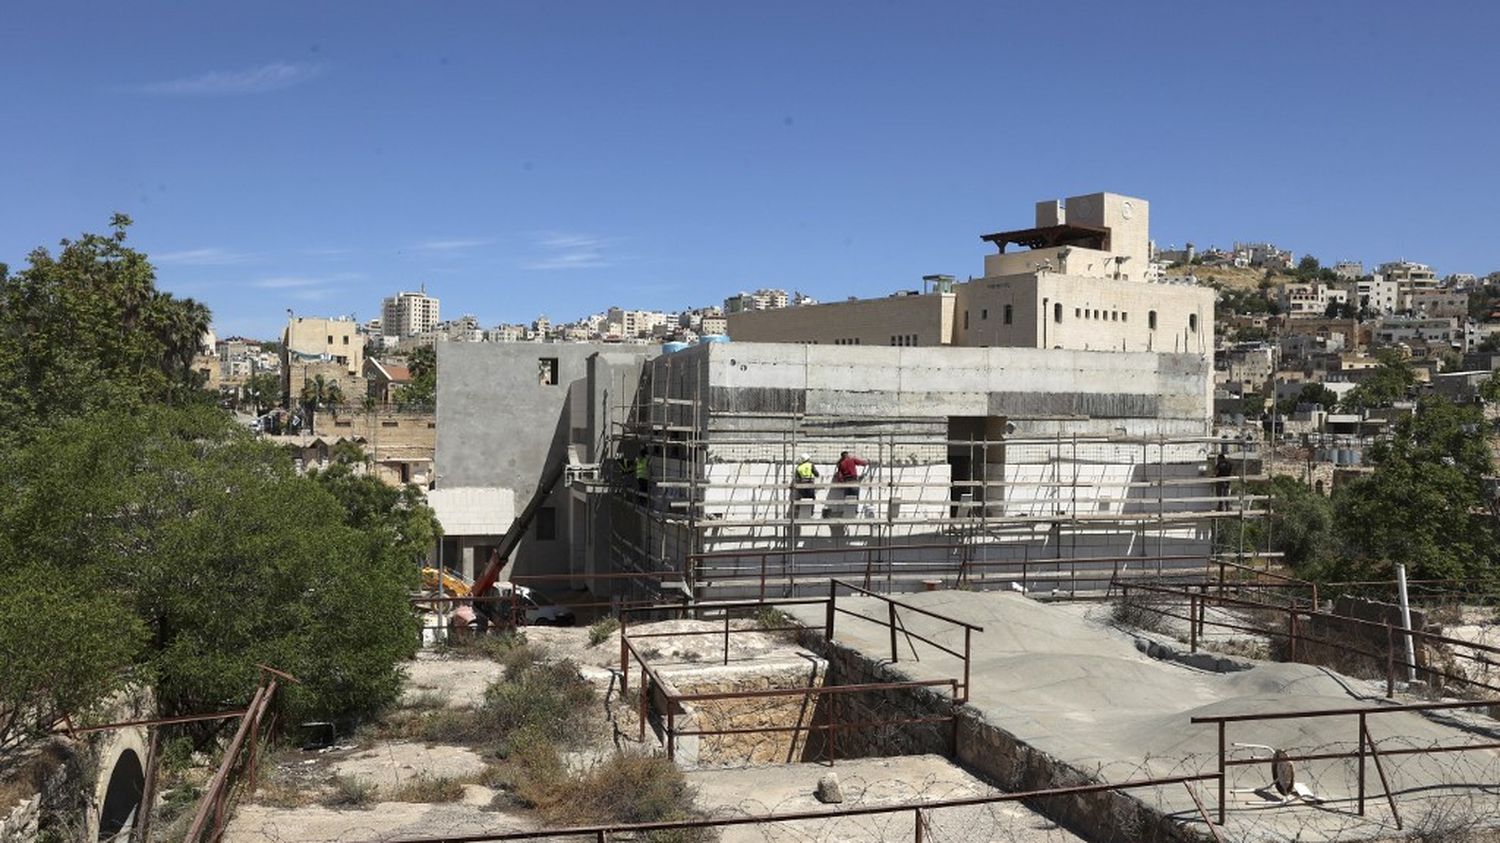 West Bank: Israel approves nearly 4,500 housing units in settlements
